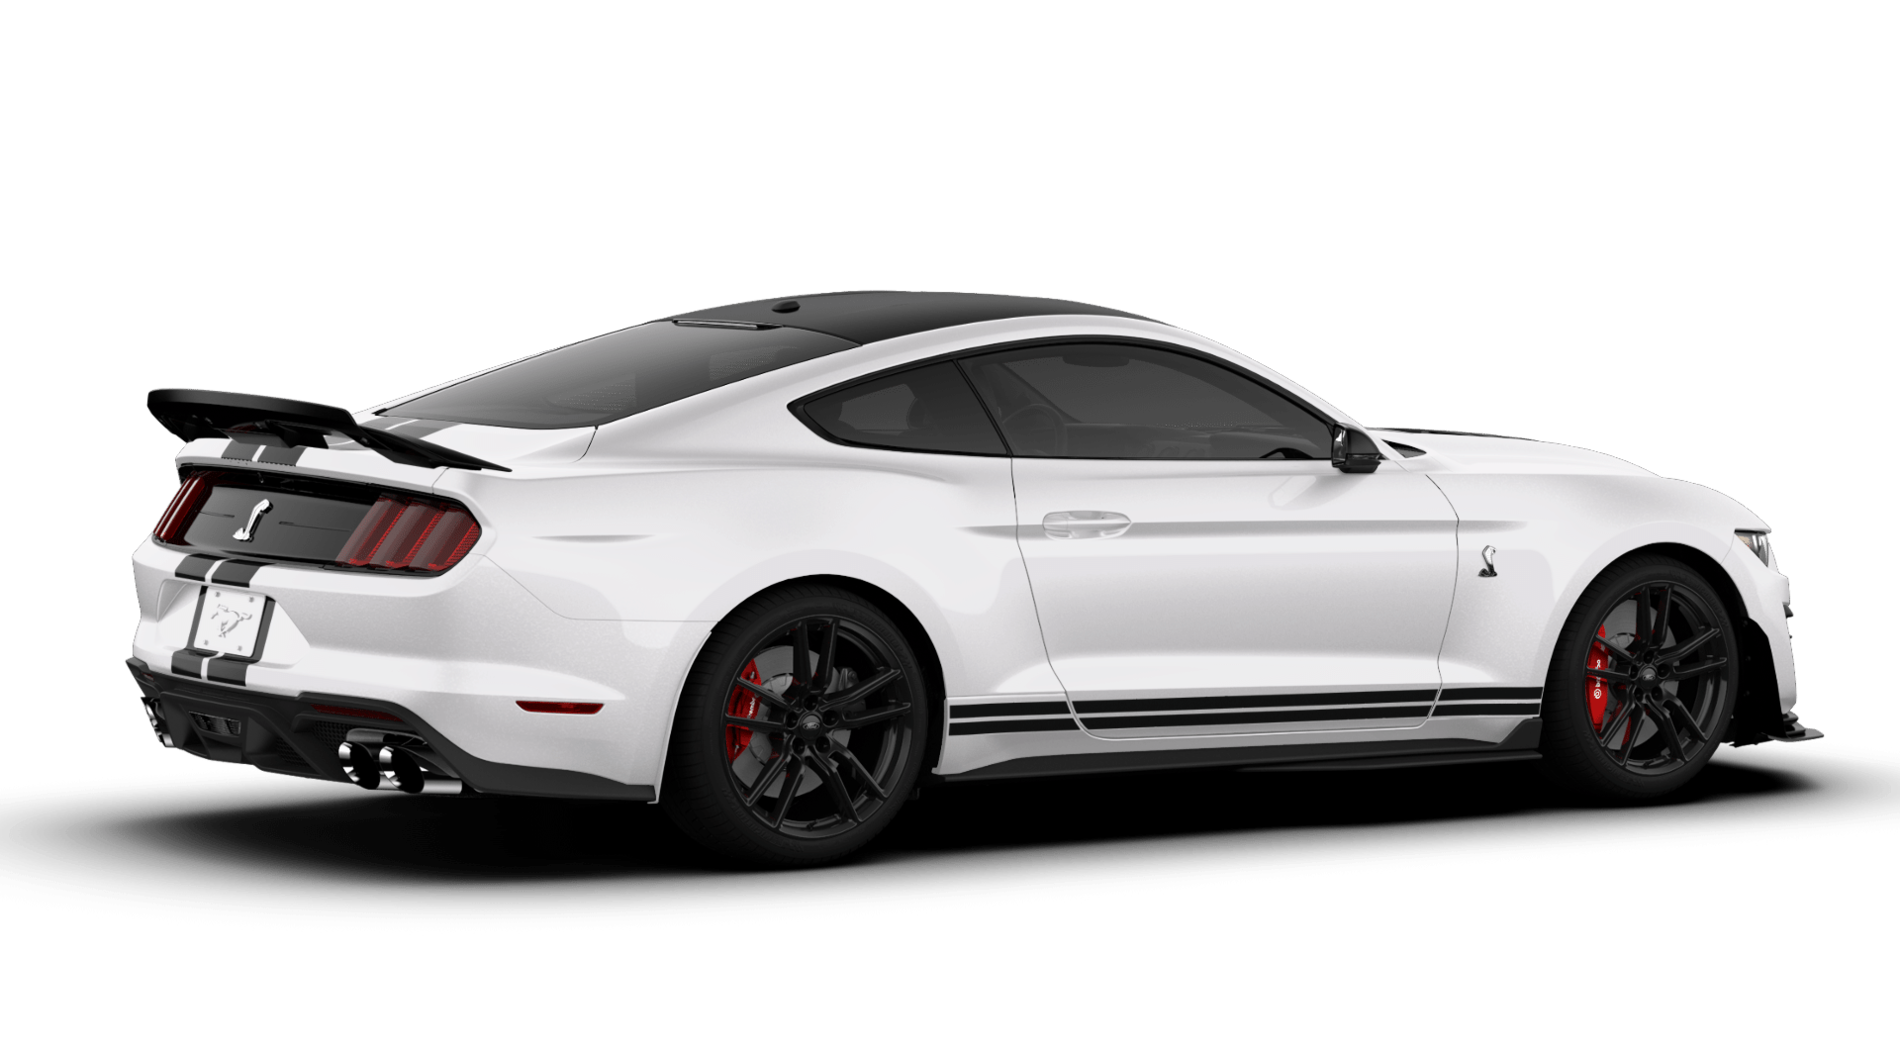 Oxford White GT500 pictures | Page 2 | 2015+ S550 Mustang Forum (GT ...